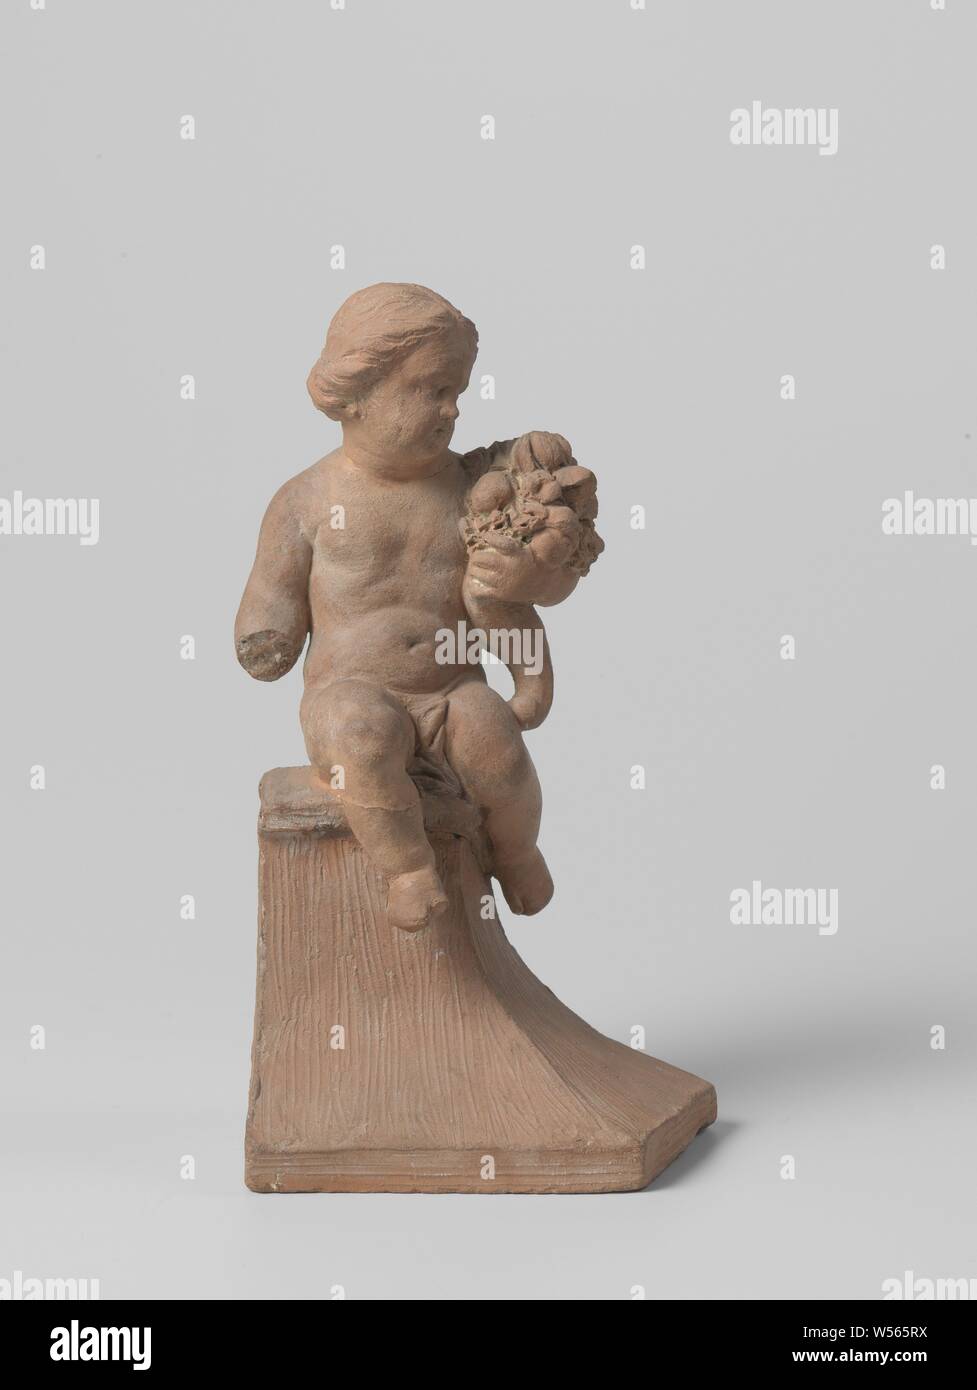 Season, presented by child with attribute, Northern Netherlands, 1725 - 1740, terracotta (clay material), h 19 cm × w 10.5 cm × d 8.5 cm Stock Photo